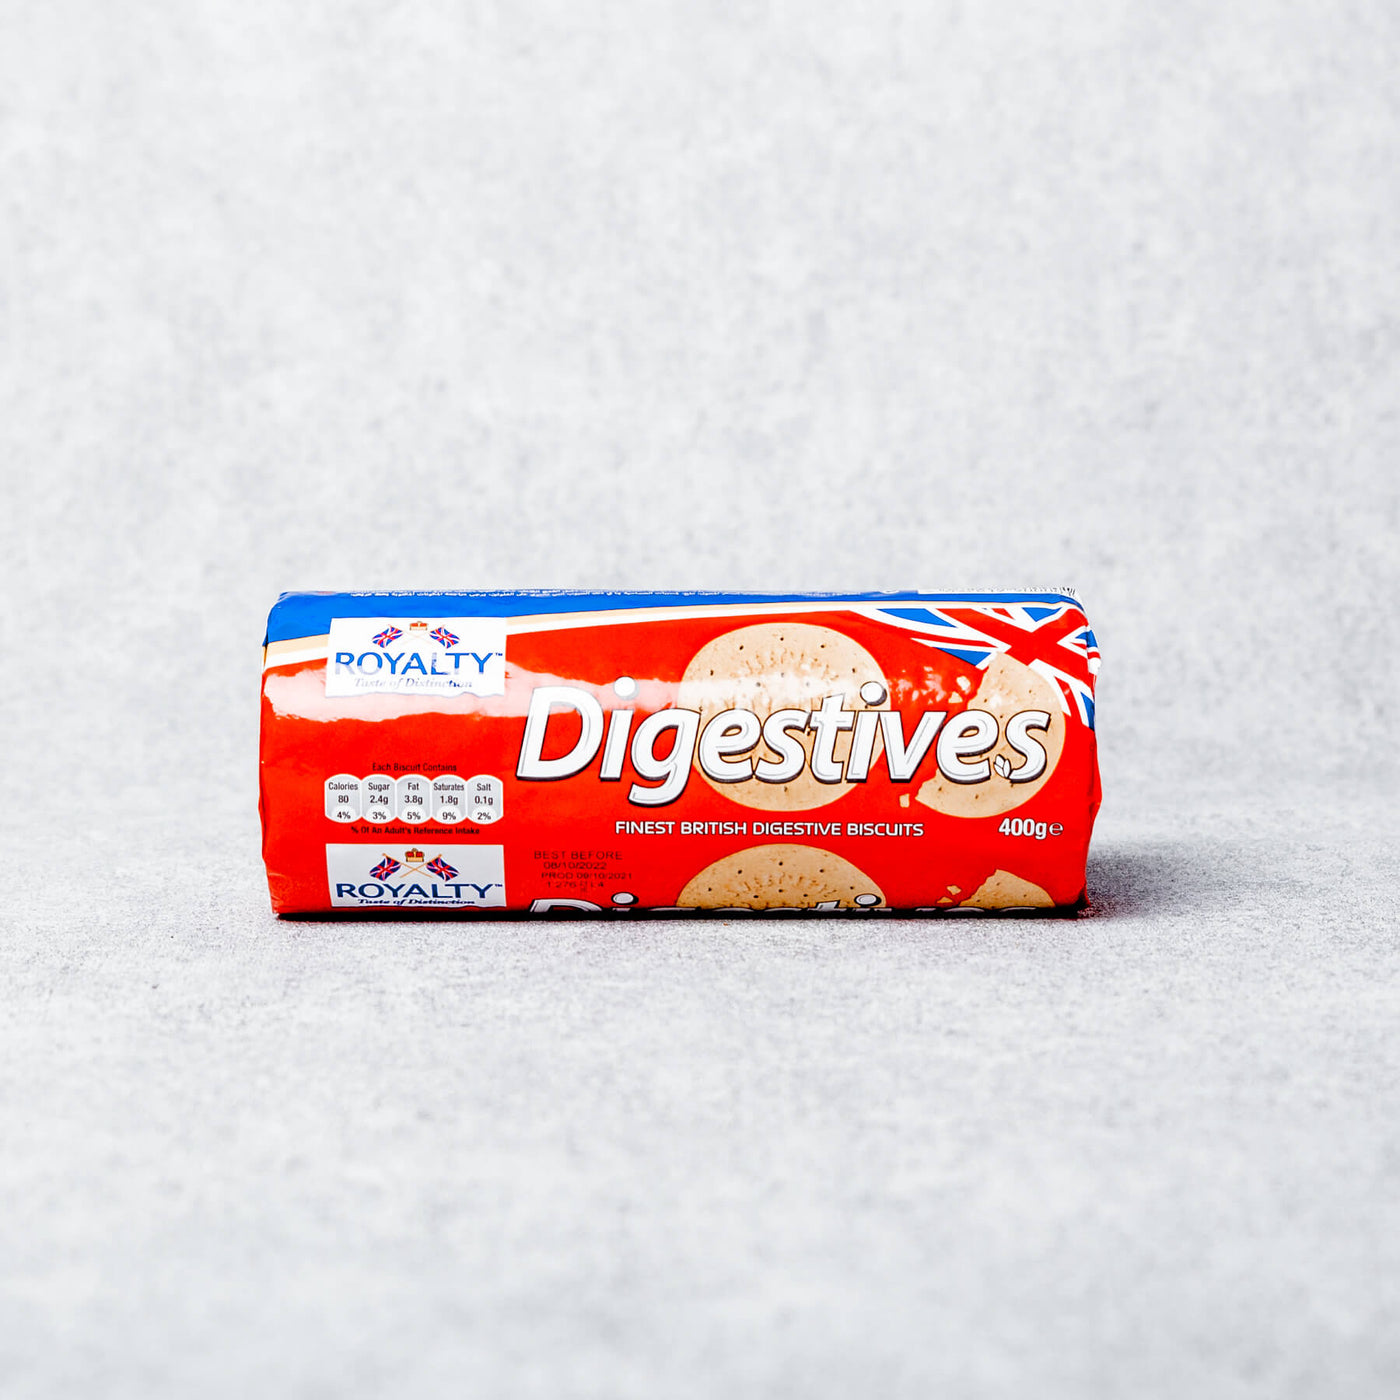 Royalty Digestives Bisquits